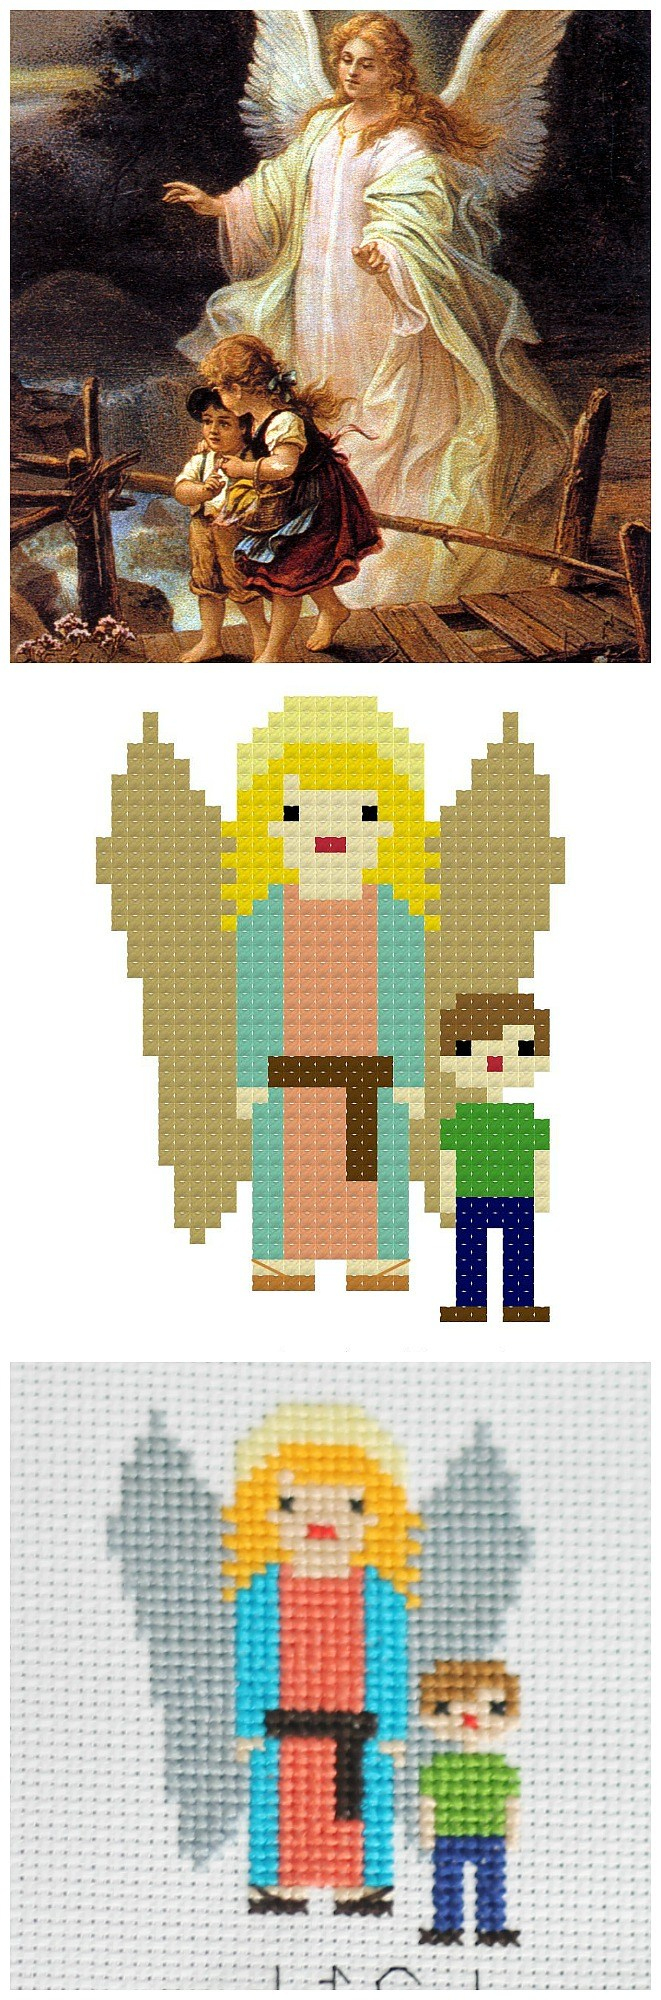 Printable Small Free Patterns Angels Cross Stitch - Free Printable Cross Stitch Patterns Angels